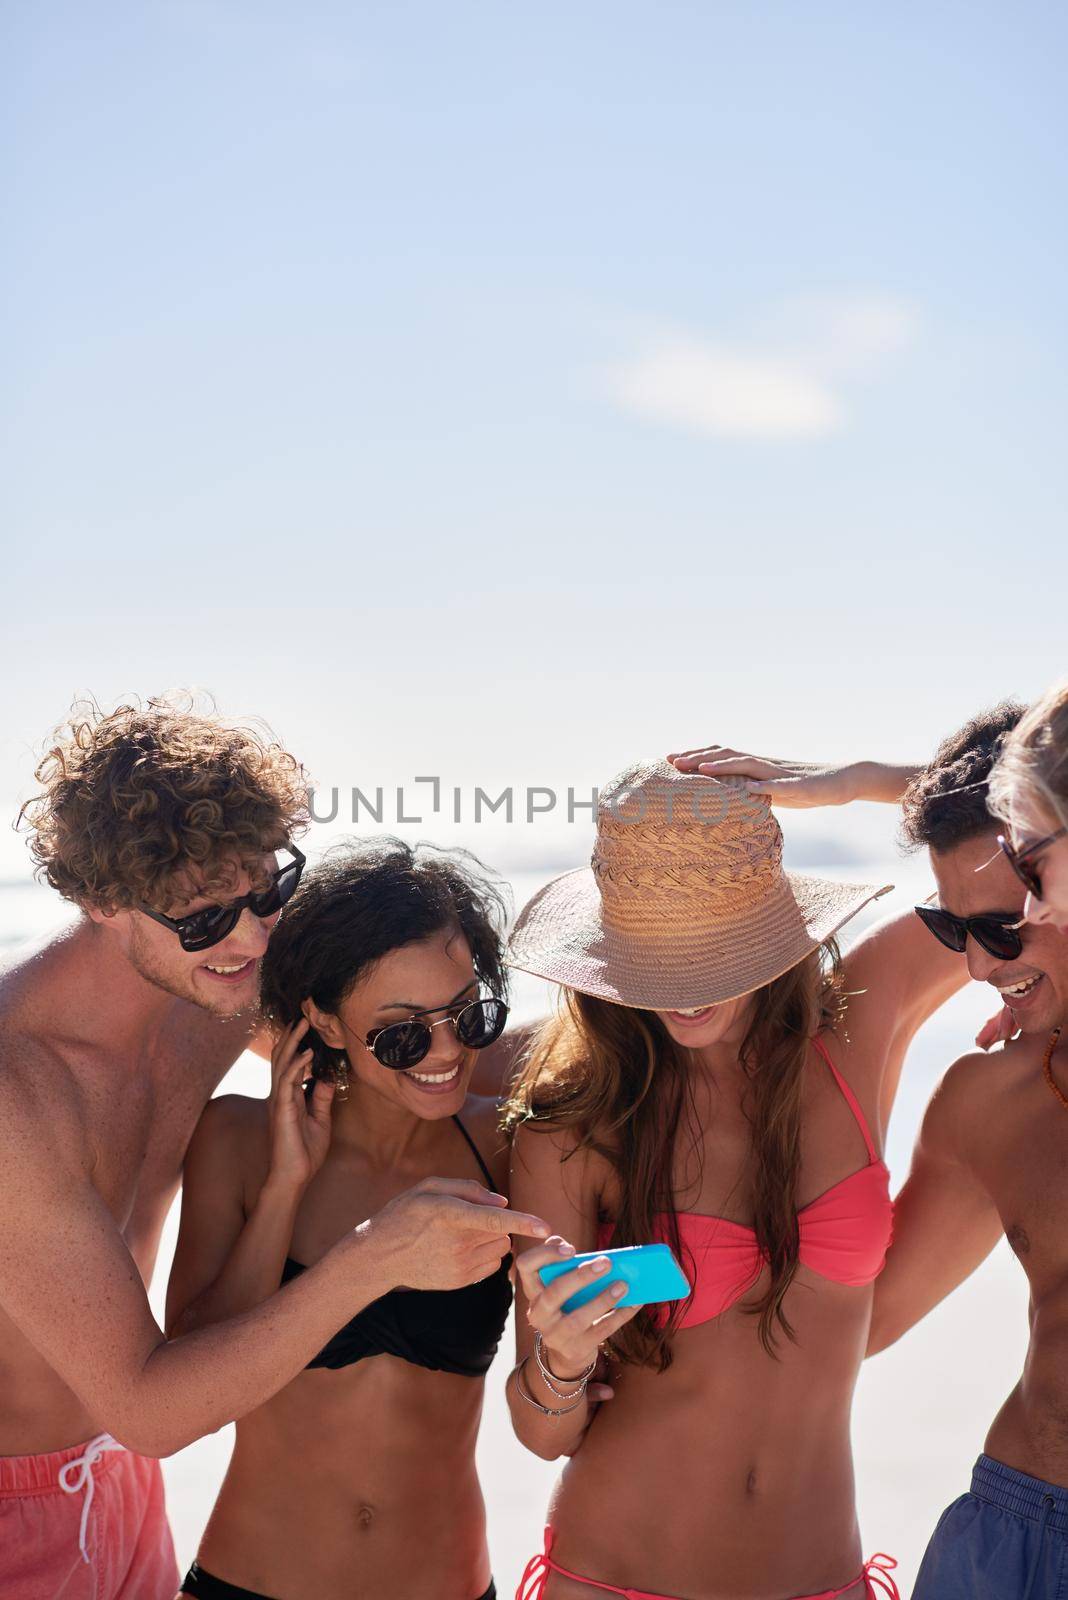 Remembering the good times. a group of friends taking selfies on the beach. by YuriArcurs